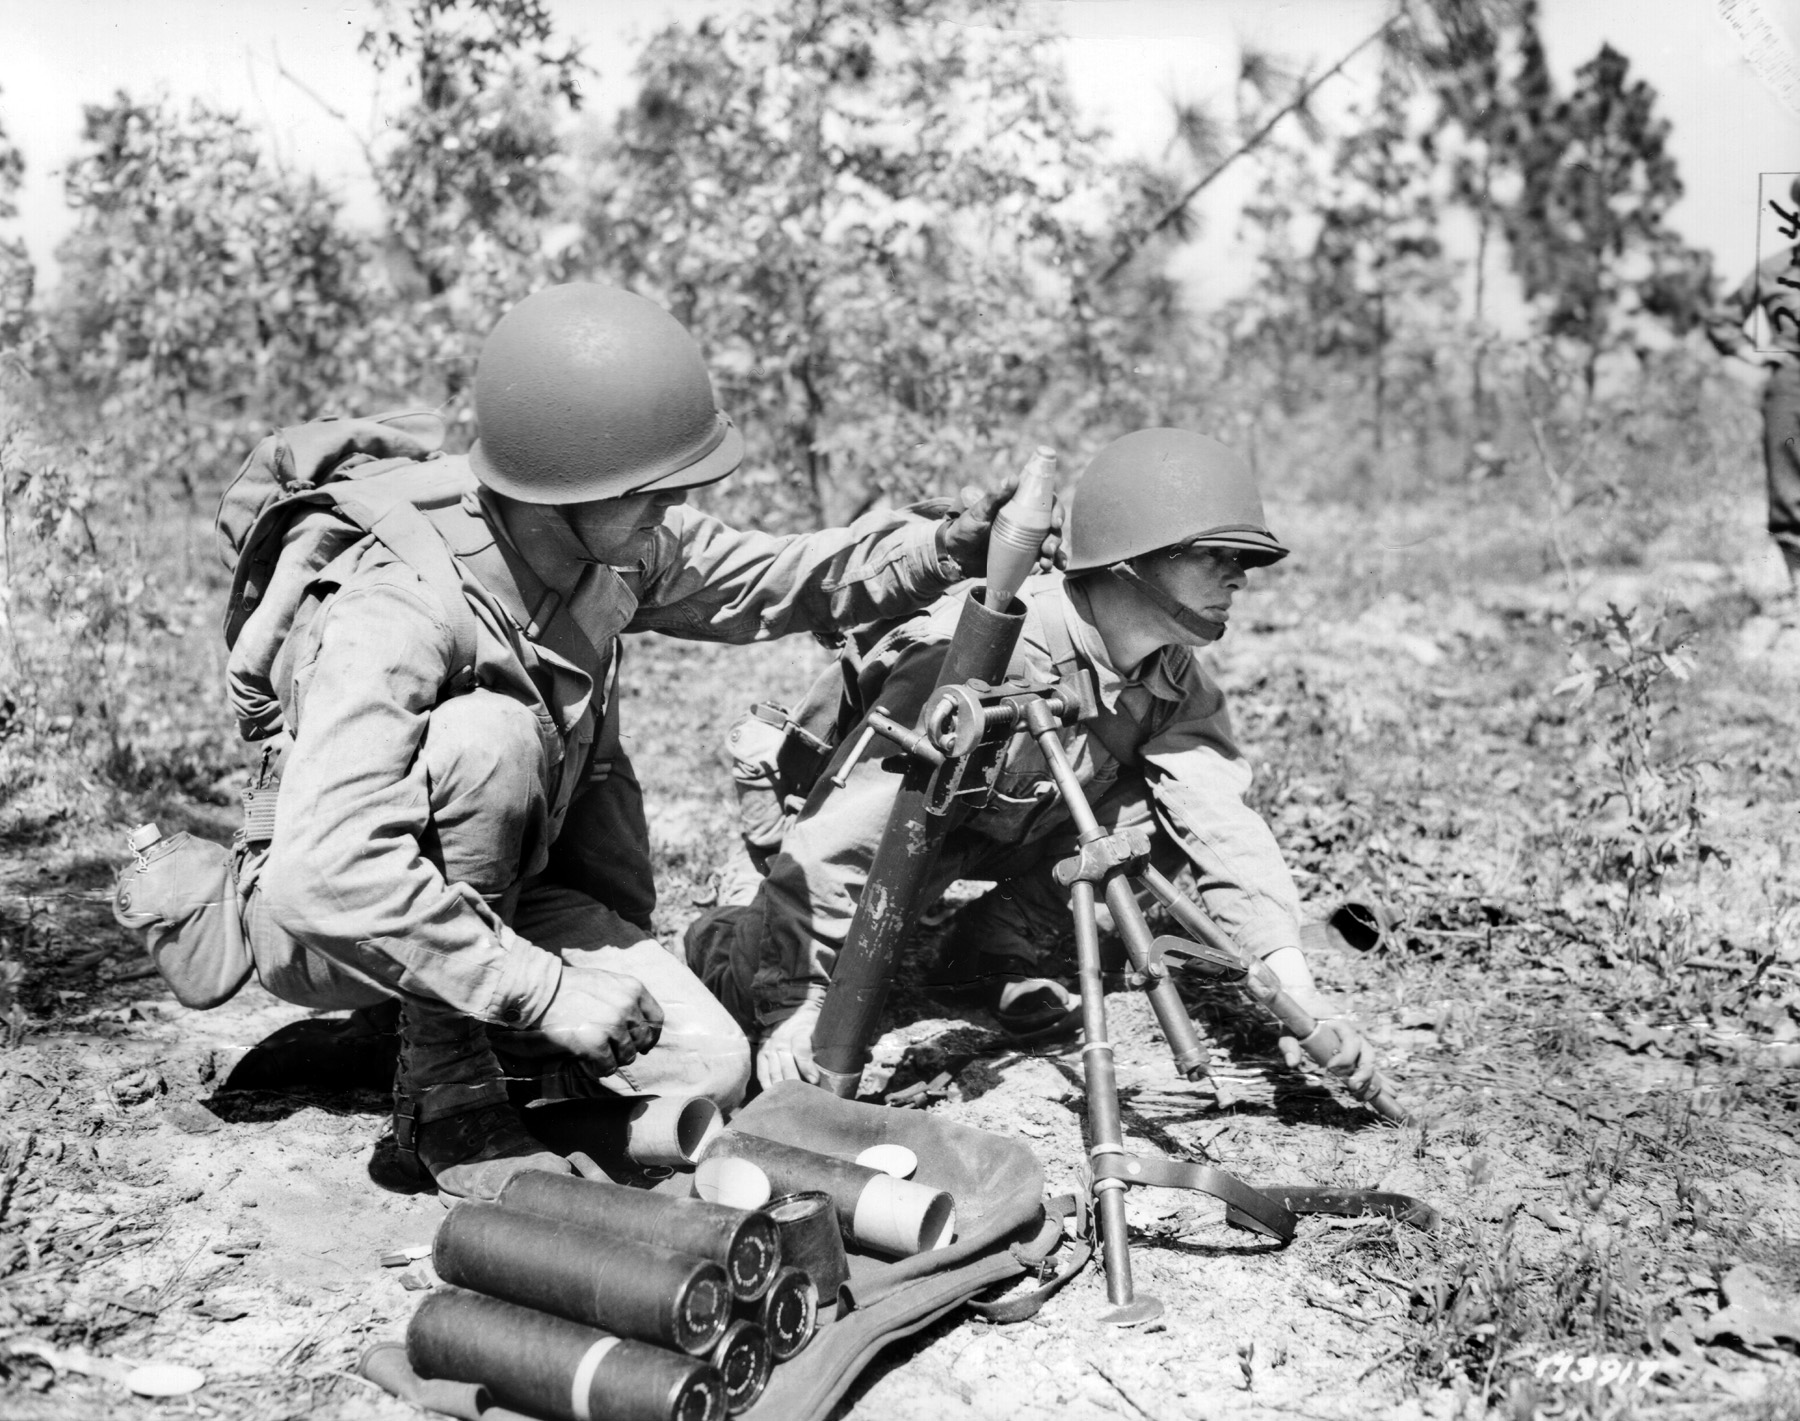 Two men from the 397th Infantry Regiment, 100th Division, fire a 60mm M2 mortar during training at Fort Jackson, South Carolina, in April 1943. The division—and Rincker—would be deployed to Europe in late September 1944. 